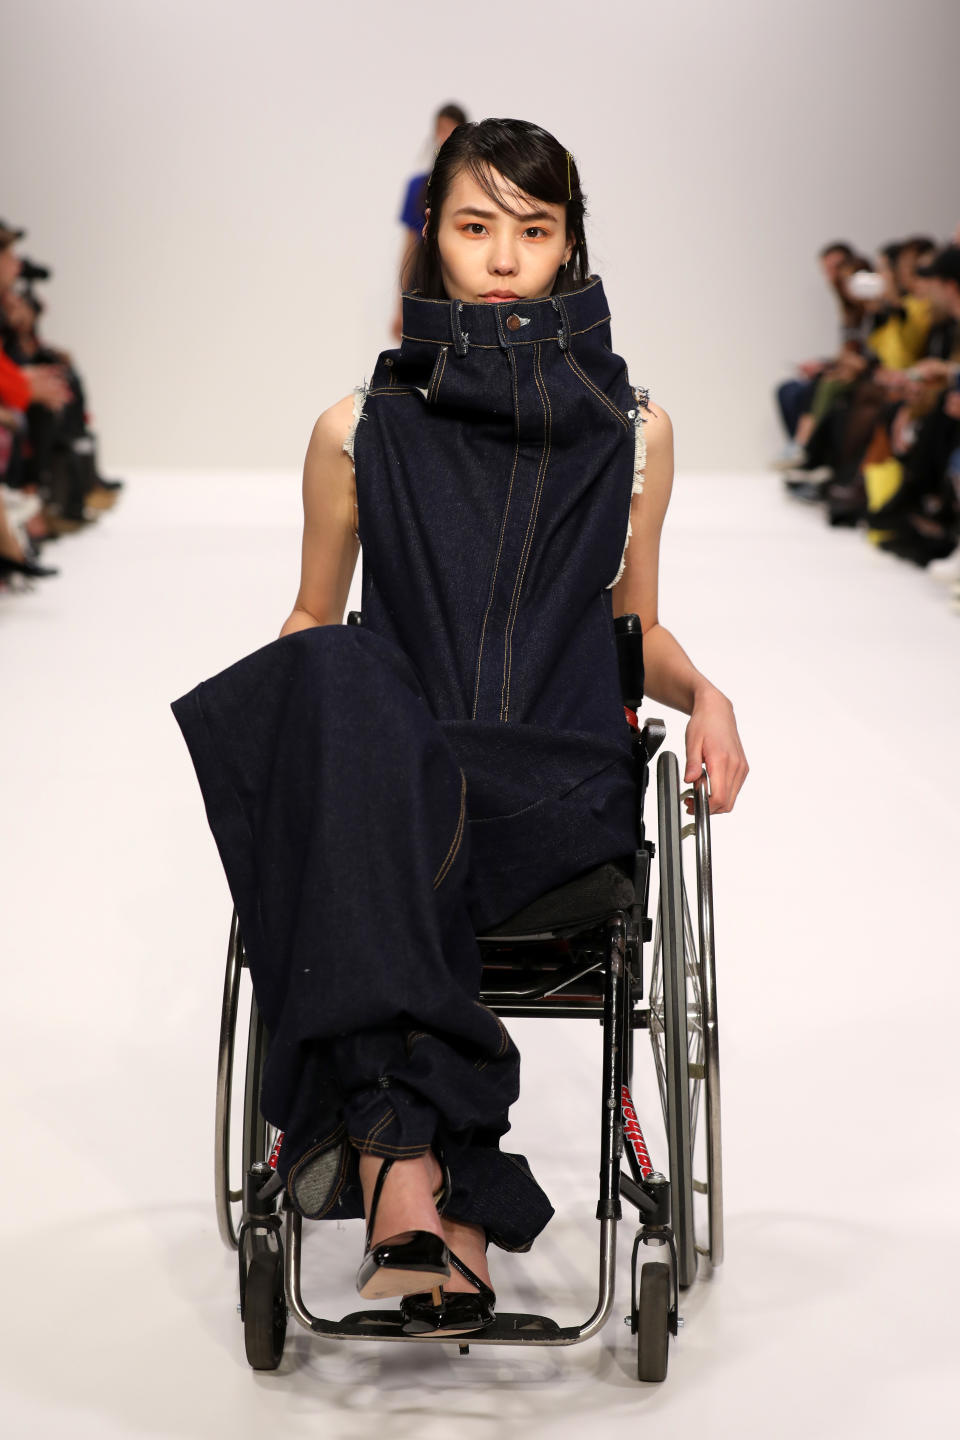 This is the second case of true diversity at London Fashion Week so far [Photo: Getty]